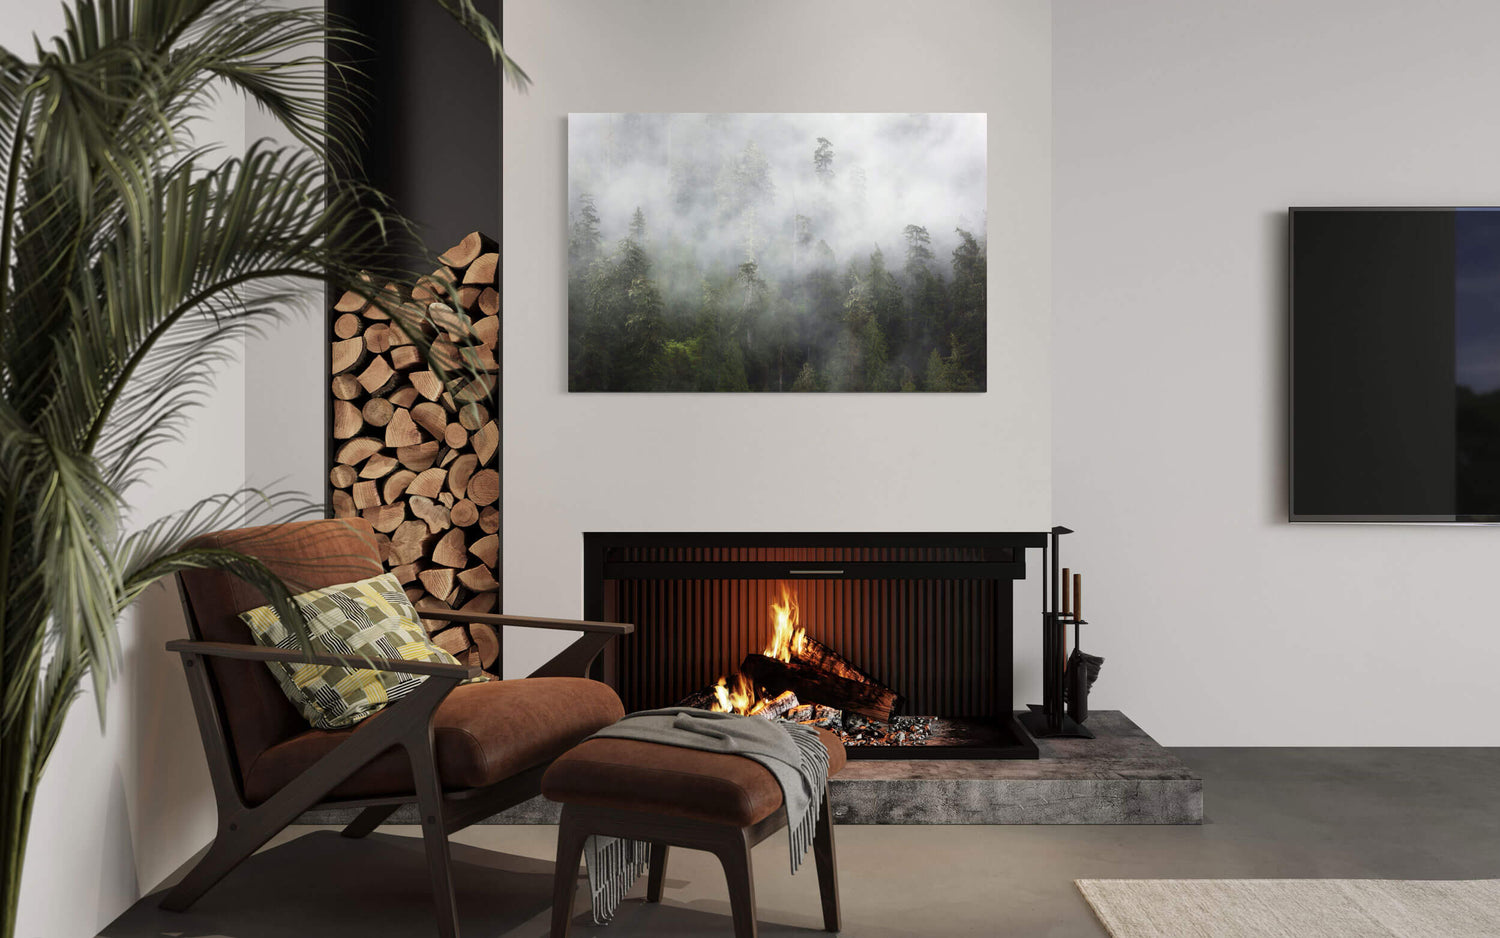 A piece of Washington art showing a Lake Quinault picture hangs in a living room.